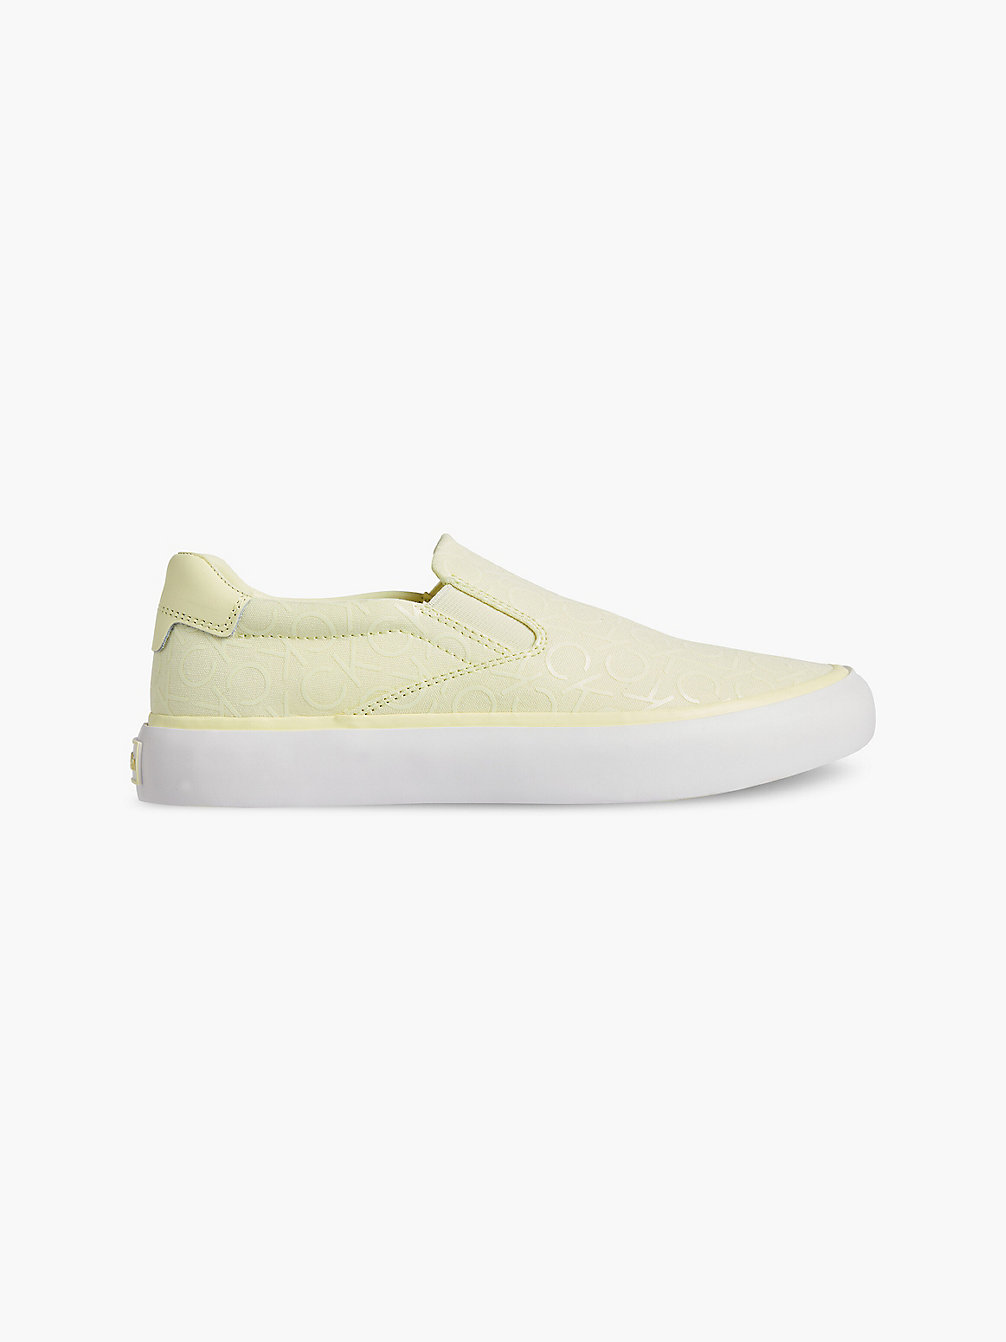 CALM YELLOW MONO MIX Recycled Canvas Slip-On Shoes undefined women Calvin Klein